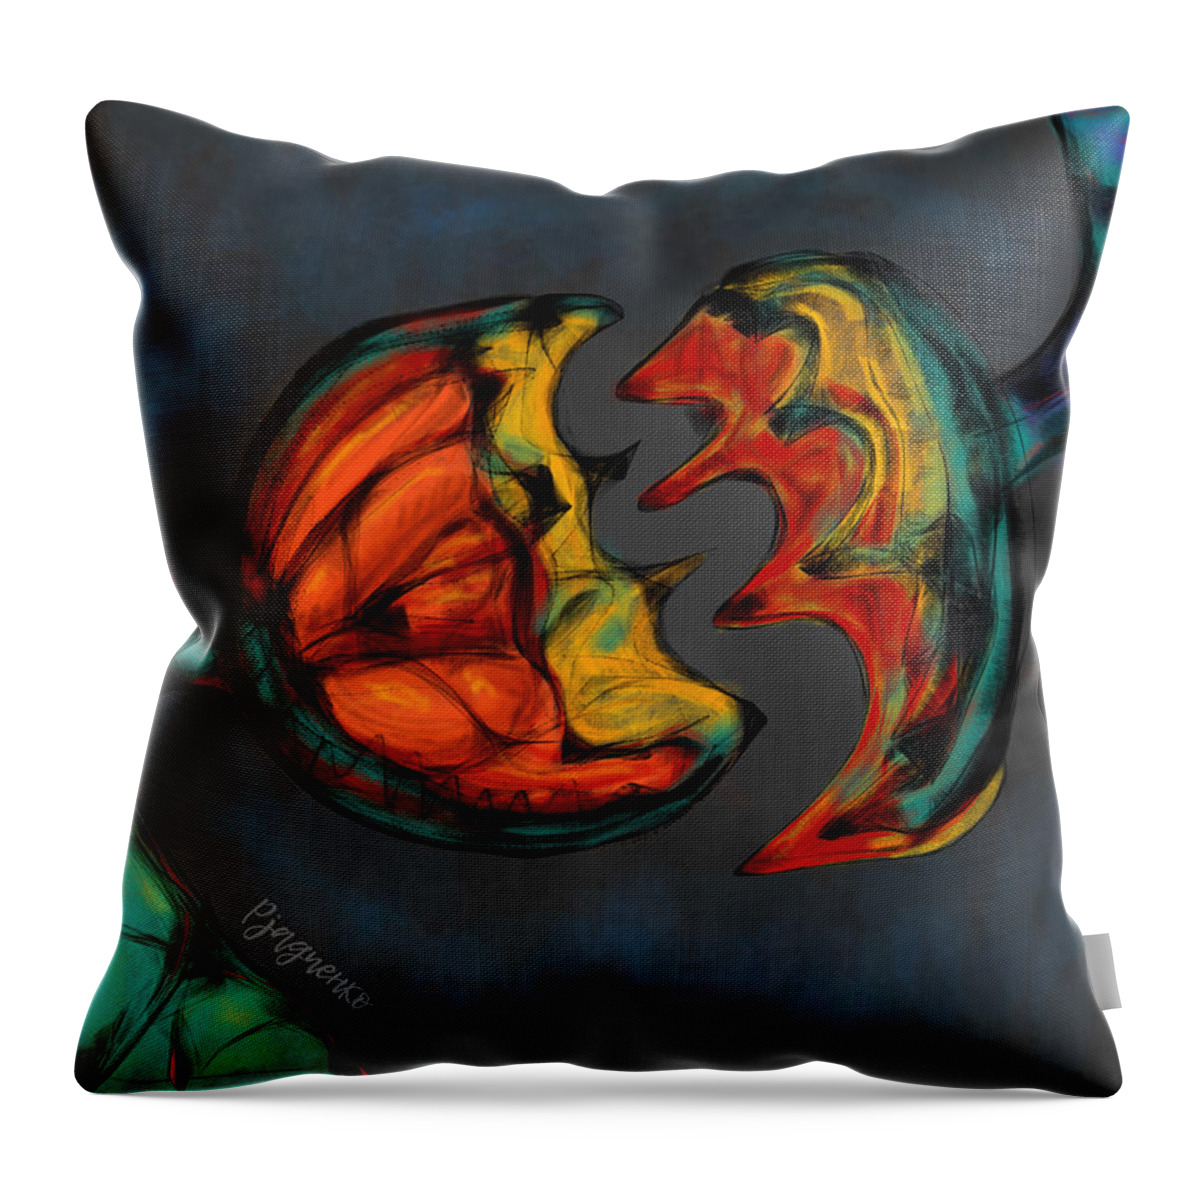 Attraction Throw Pillow featuring the digital art Attraction by Ljev Rjadcenko